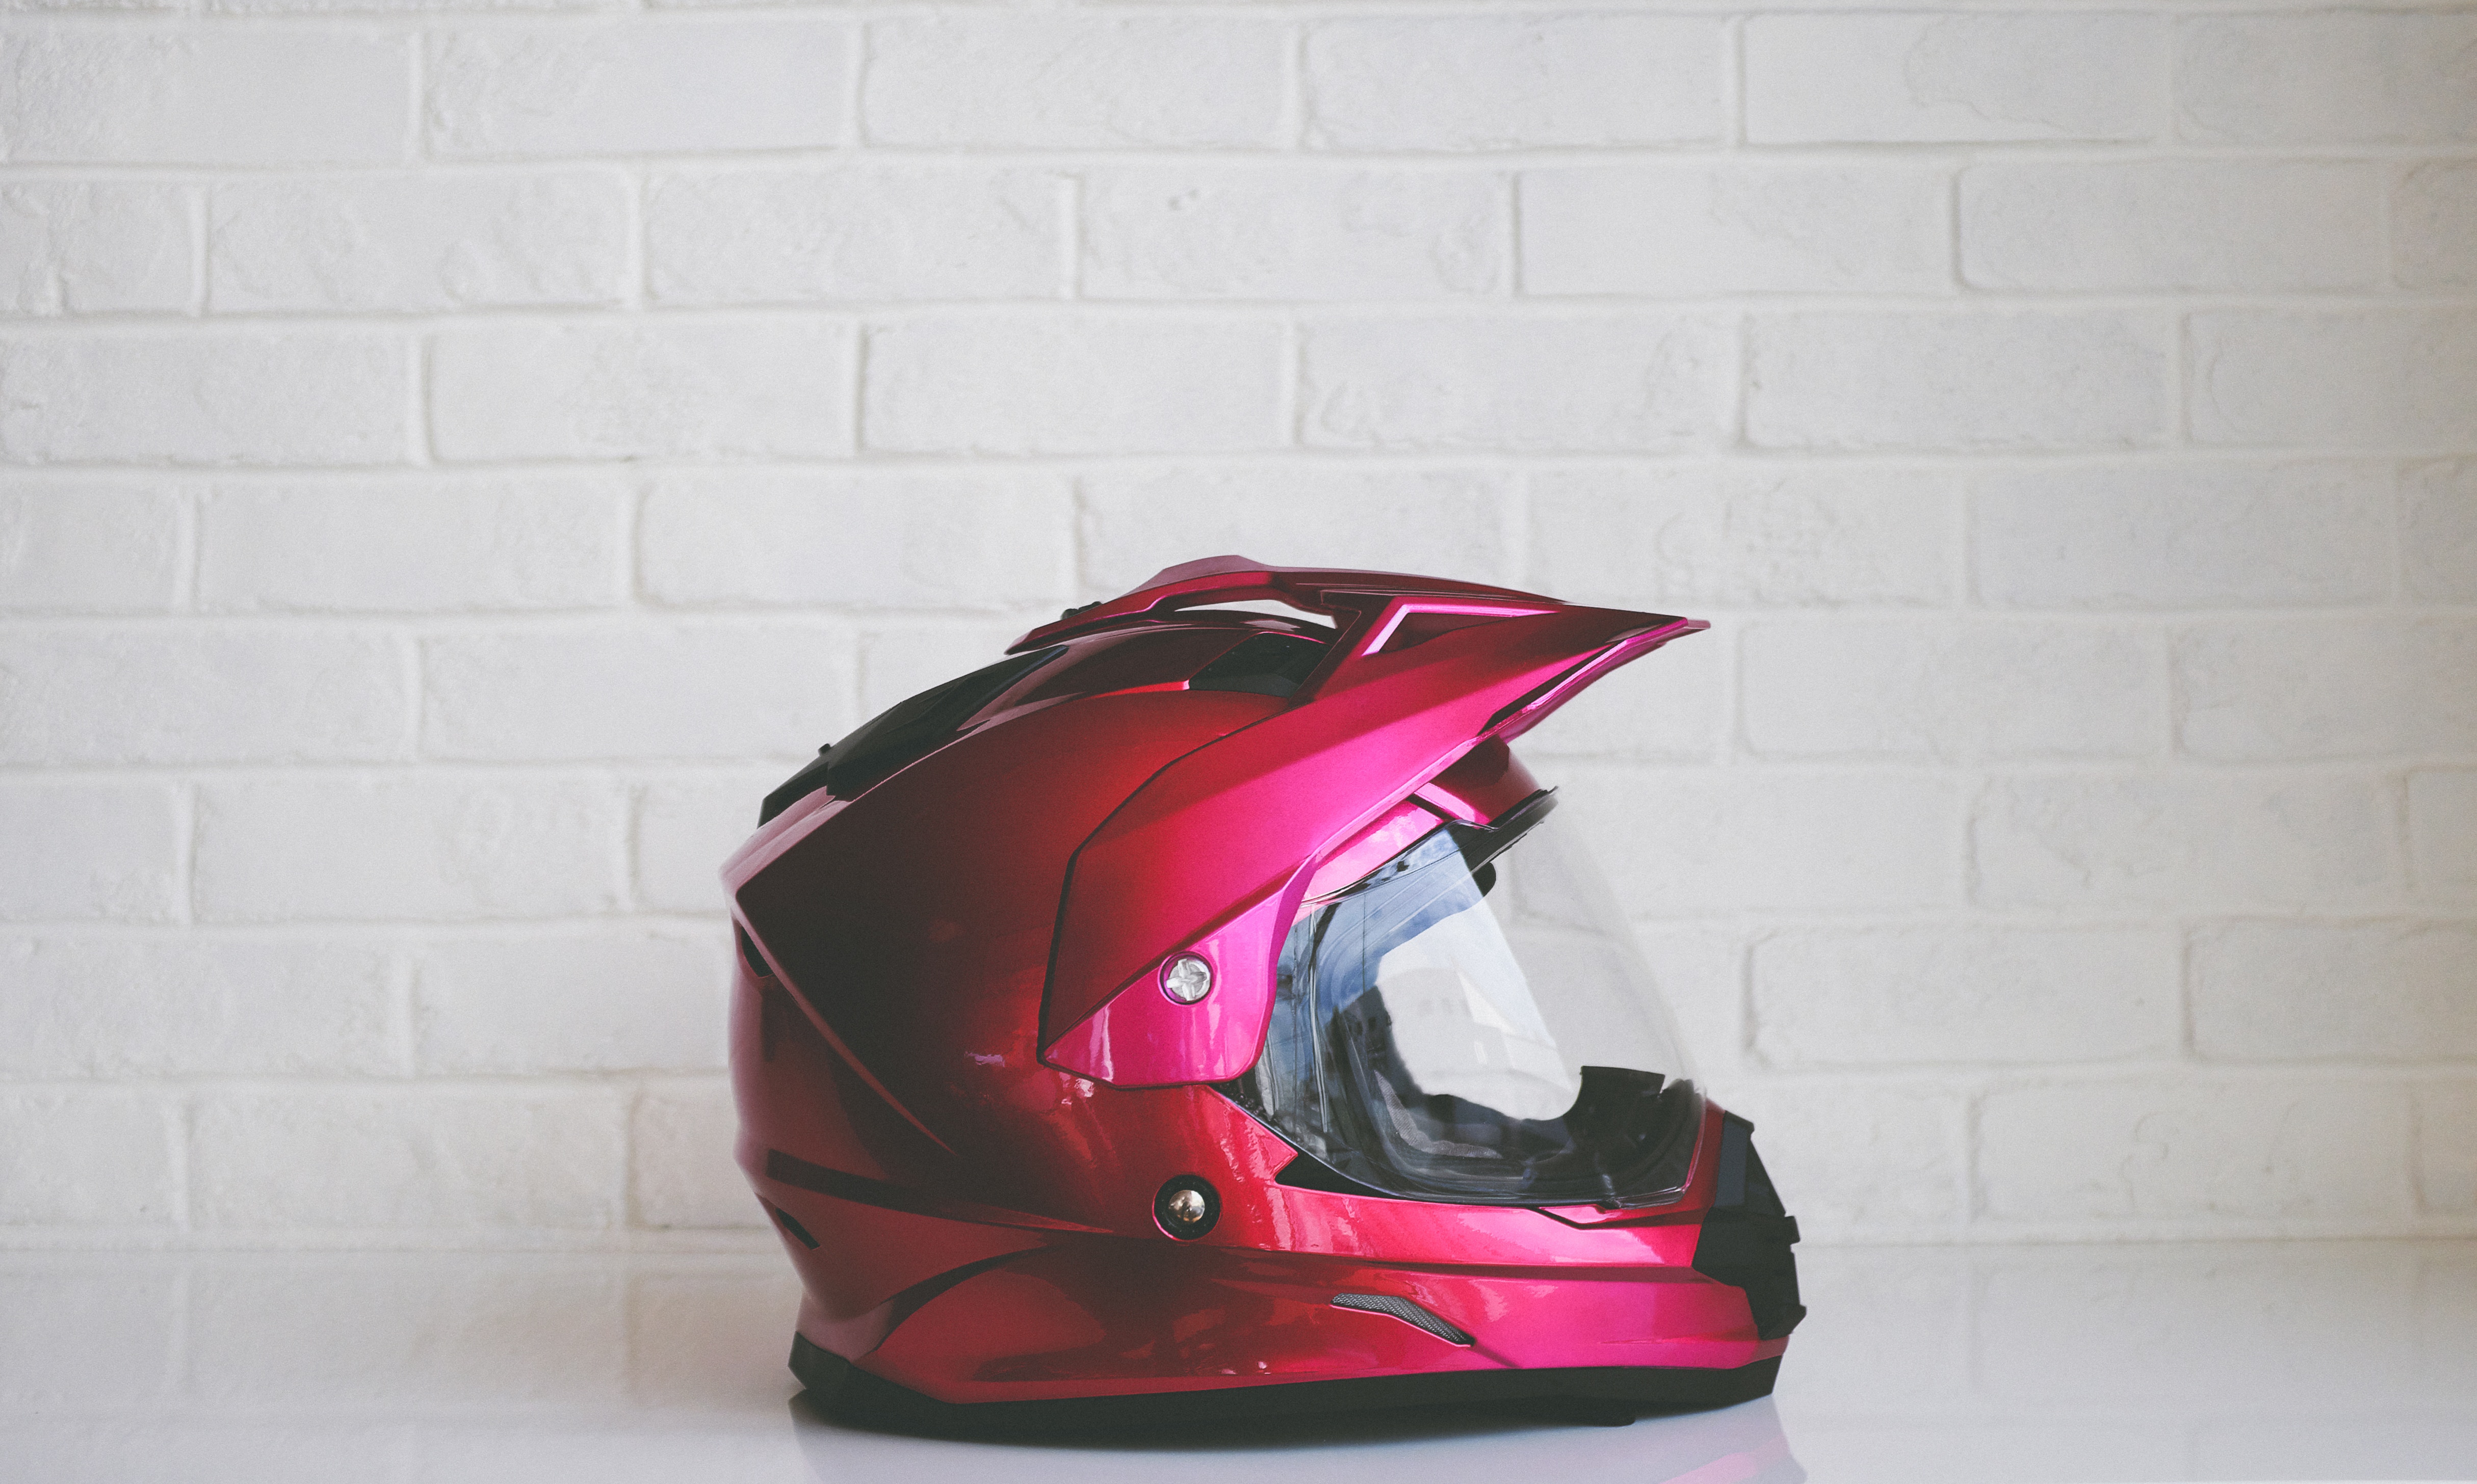 Motorcycle Helmet Audio System – Which One Should You Buy?